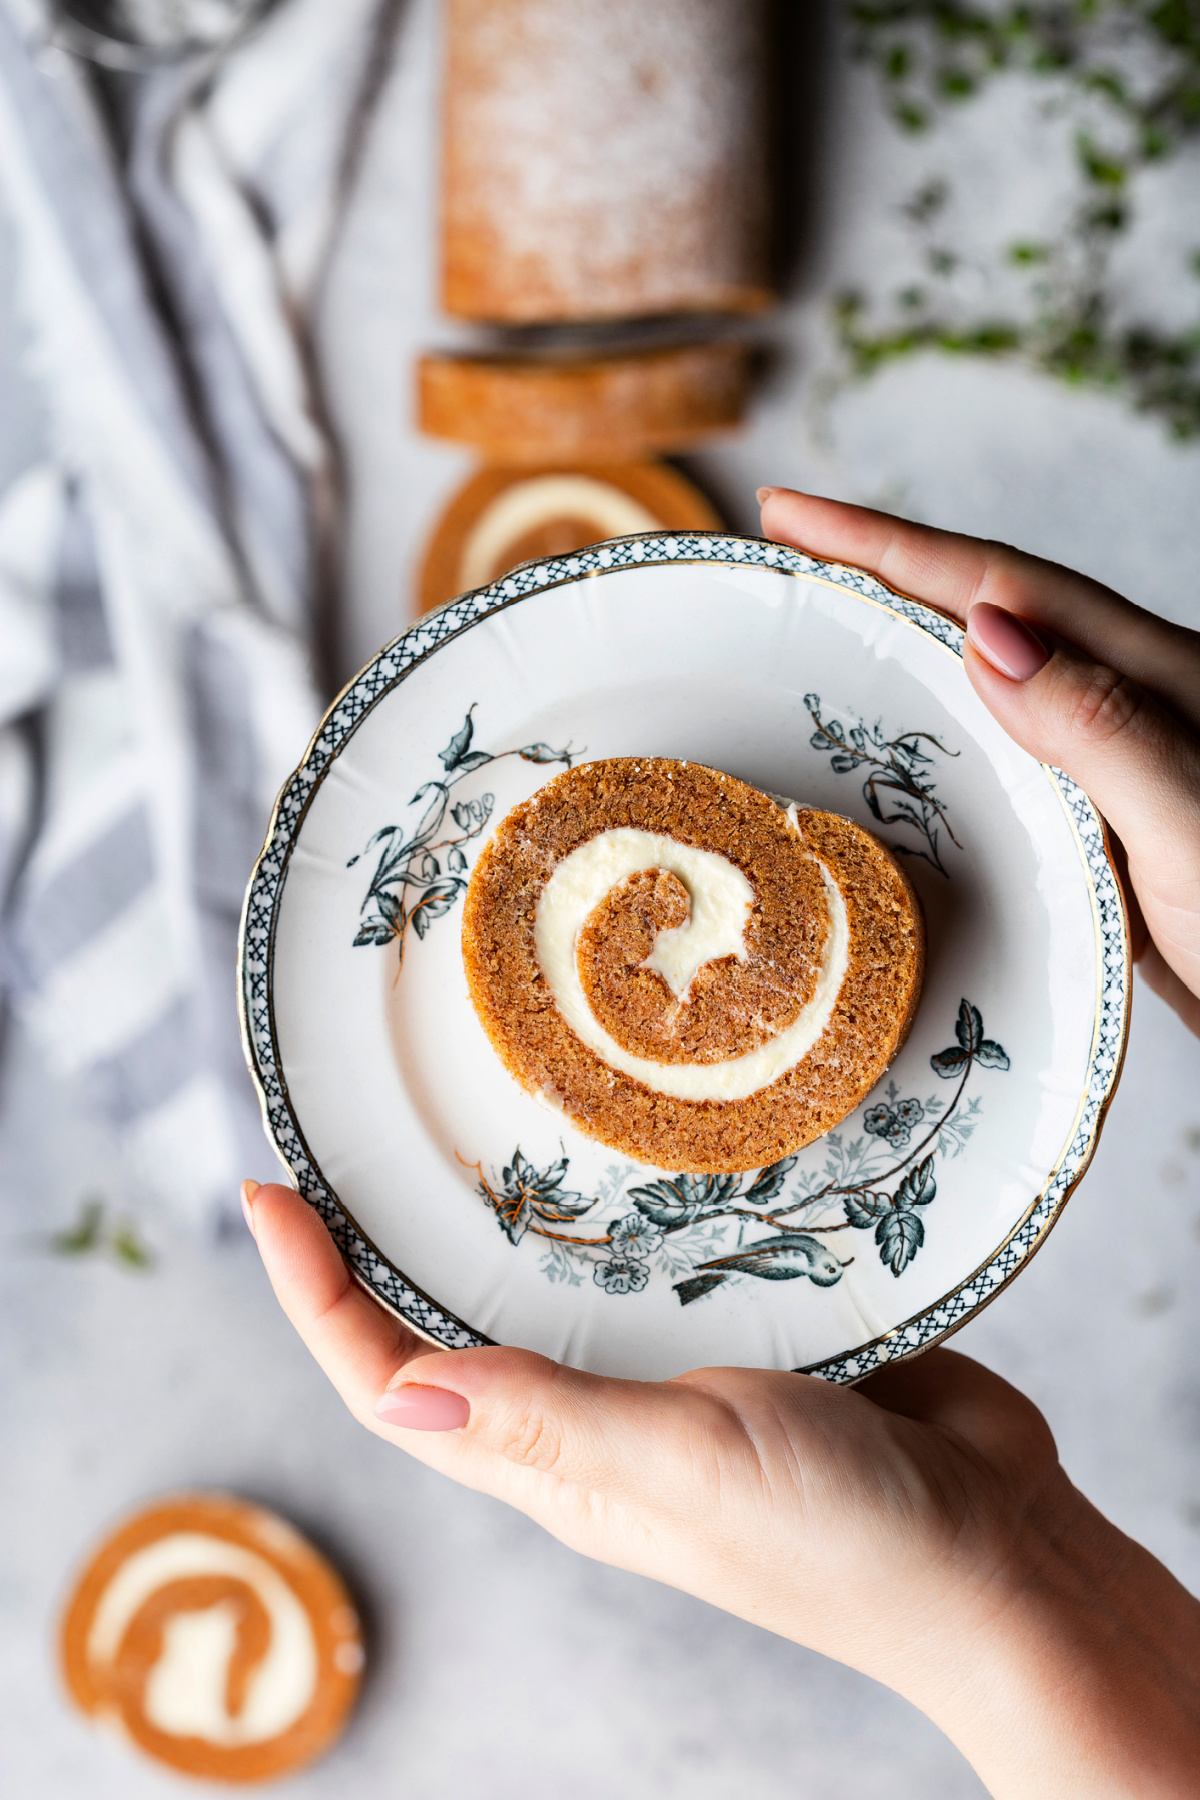 A slice of perfectly made pumpkin roll with a cream cheese filling